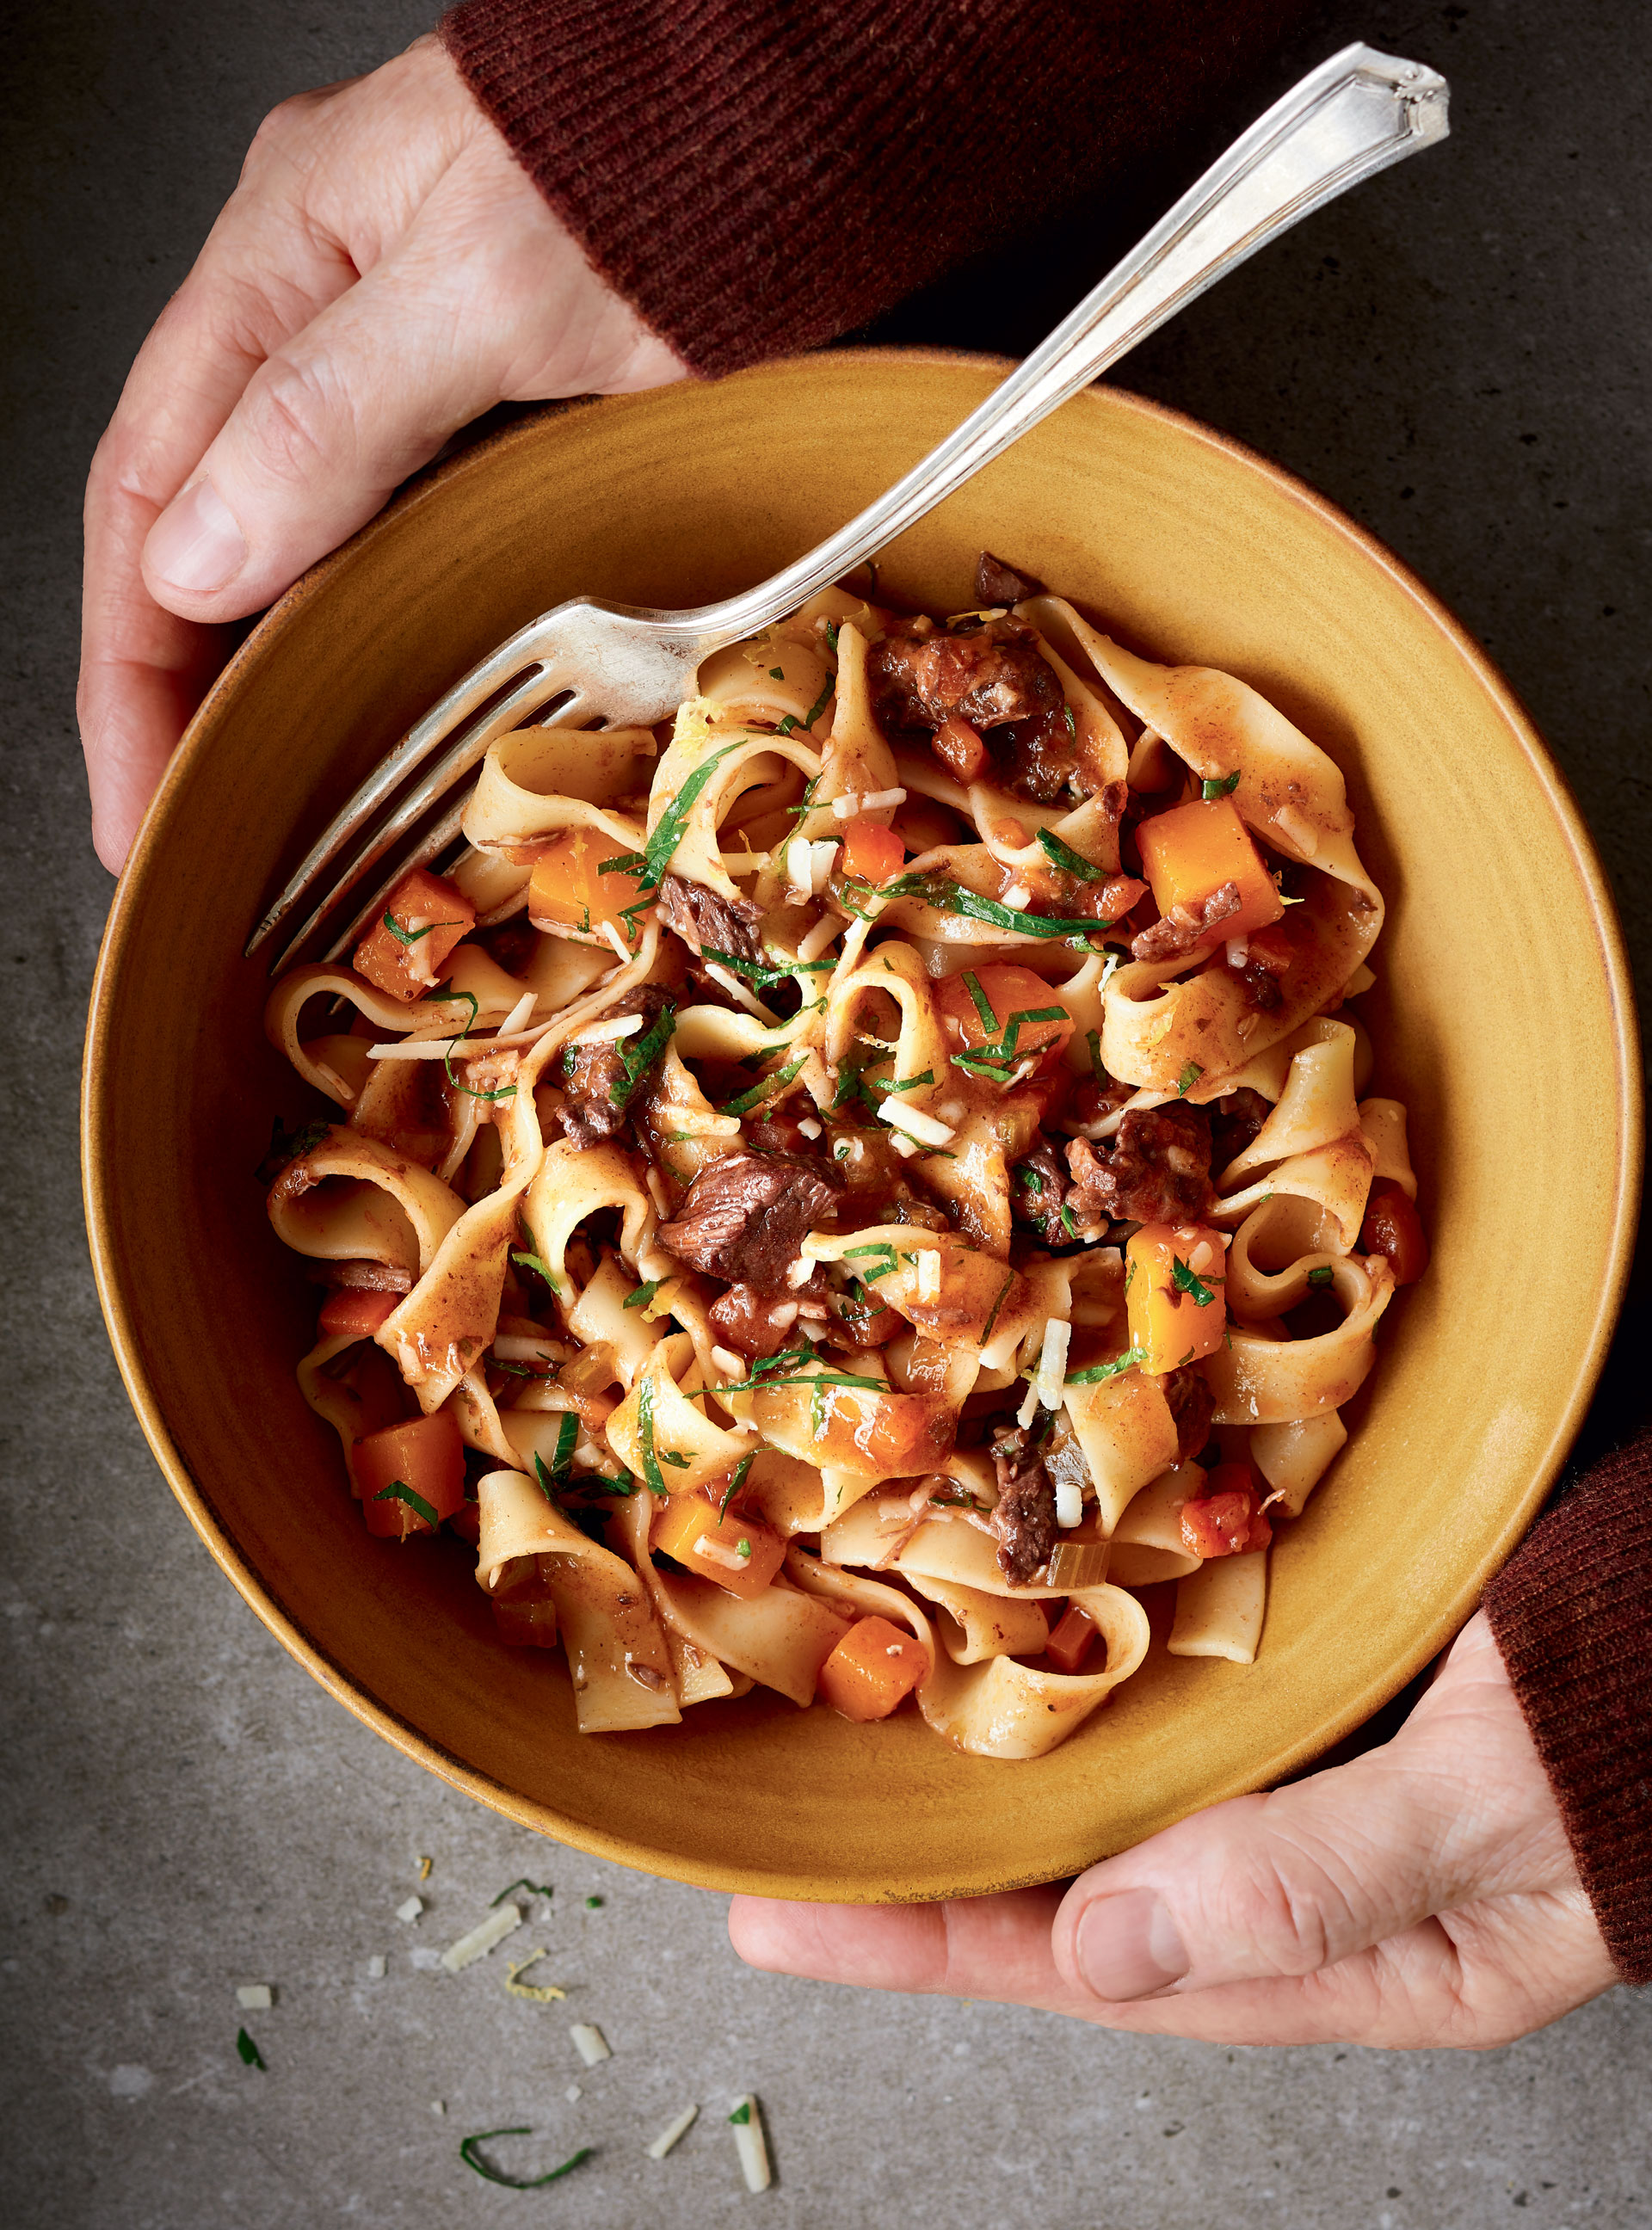 Braised Beef and Squash Pappardelle